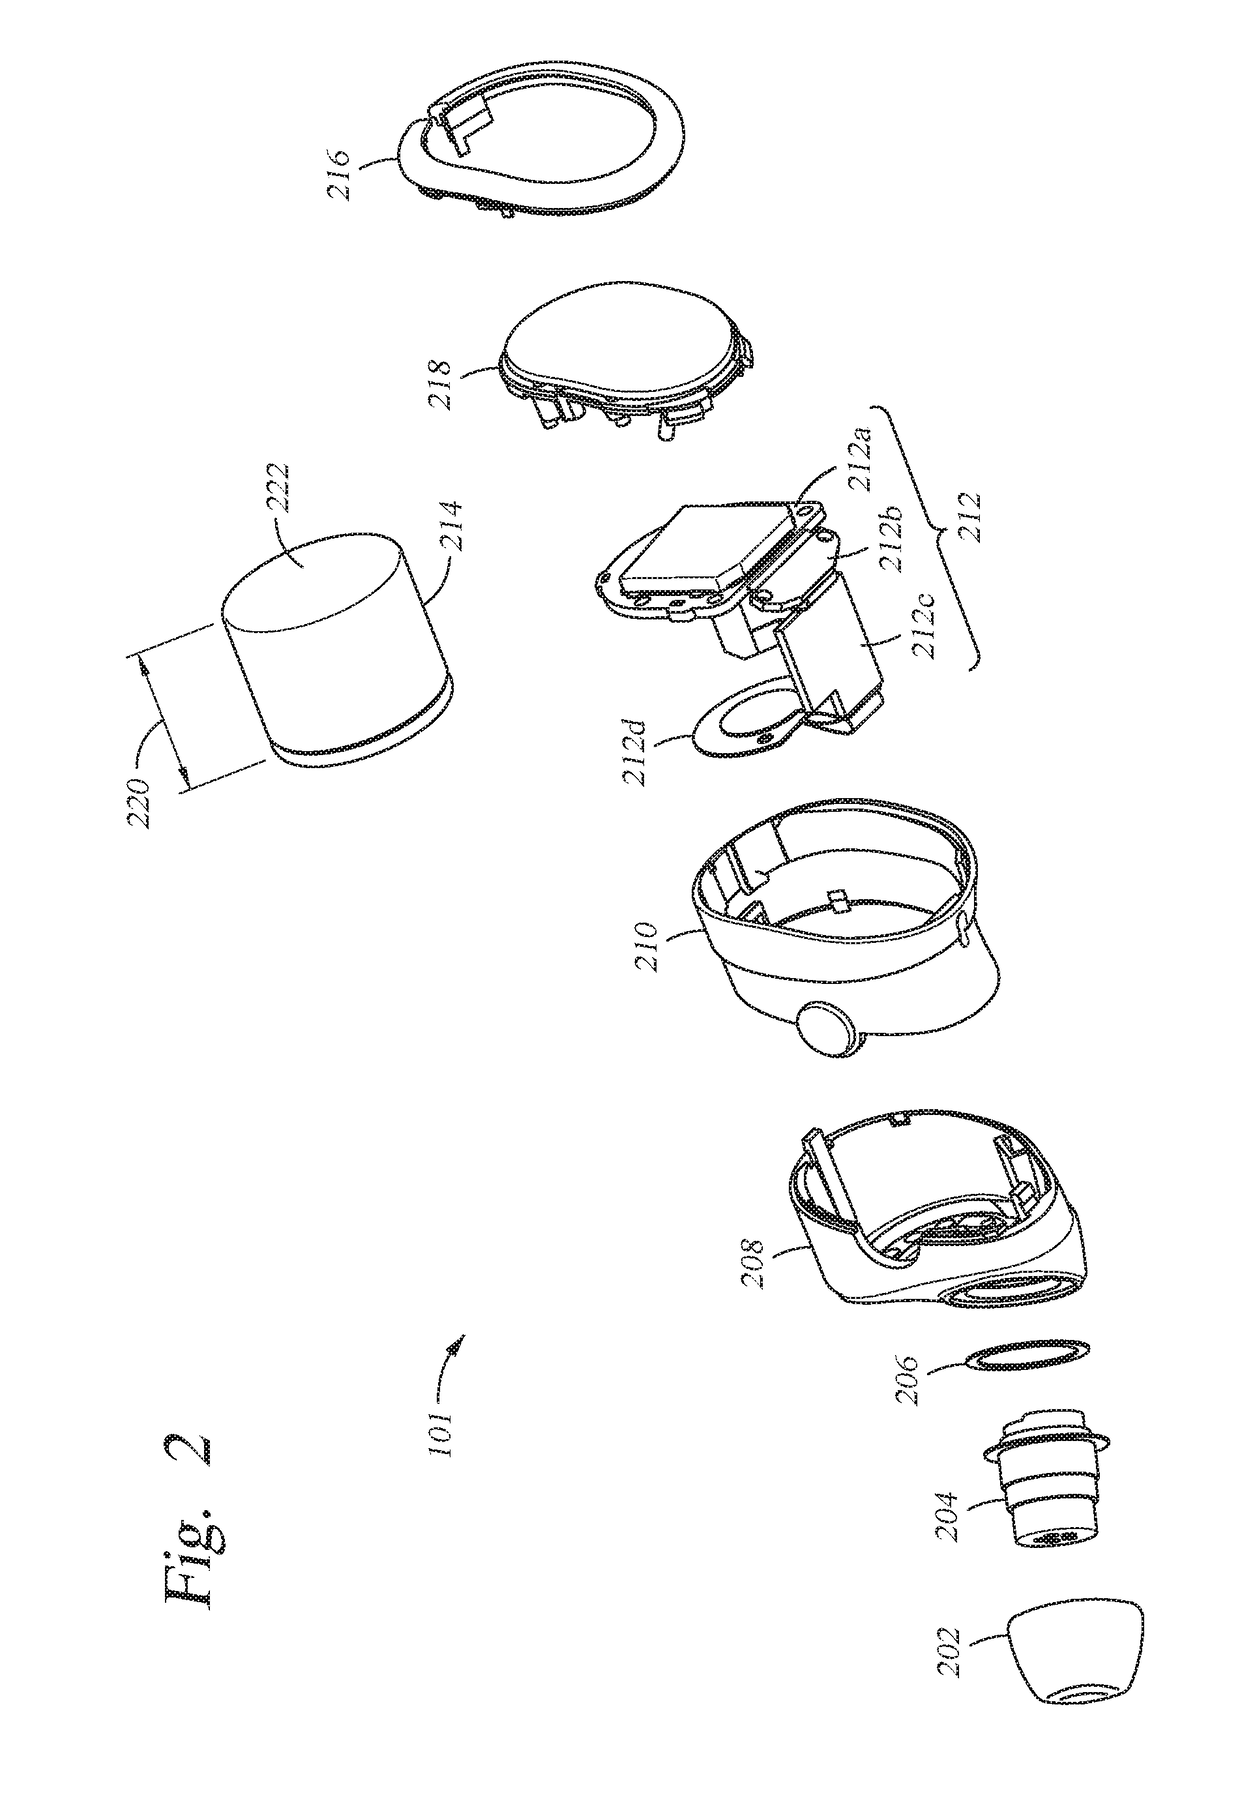 Wireless wearable electronic device communicatively coupled to a remote device